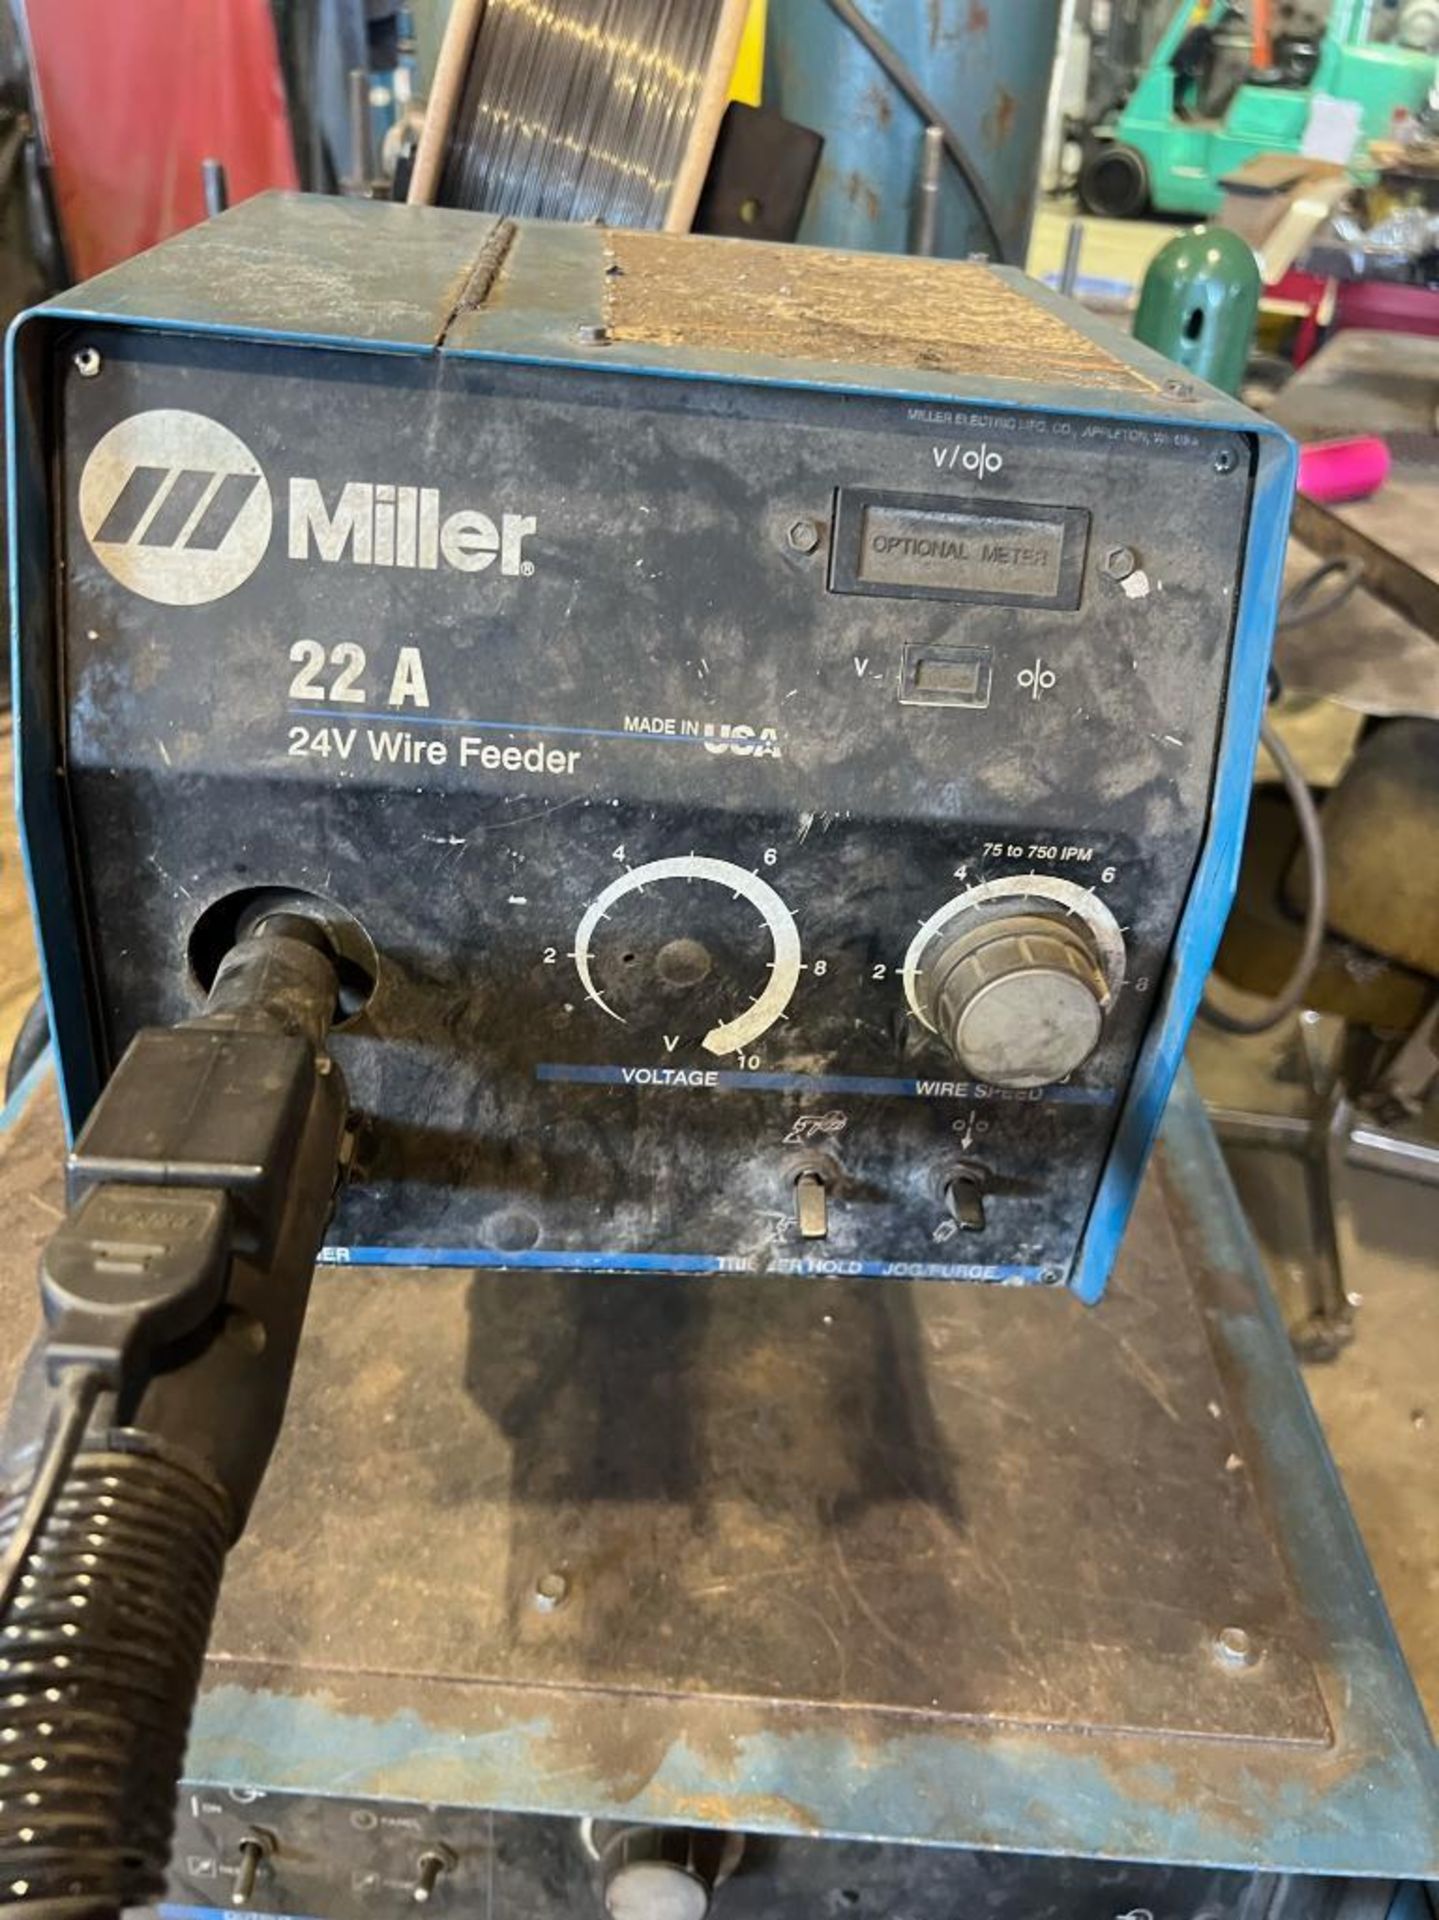 Miller Delta Weld 452 Wire Feed Welder, Sold with a Miller 24A 24V Wire Feeder, Single Phase, Bottle - Image 3 of 4